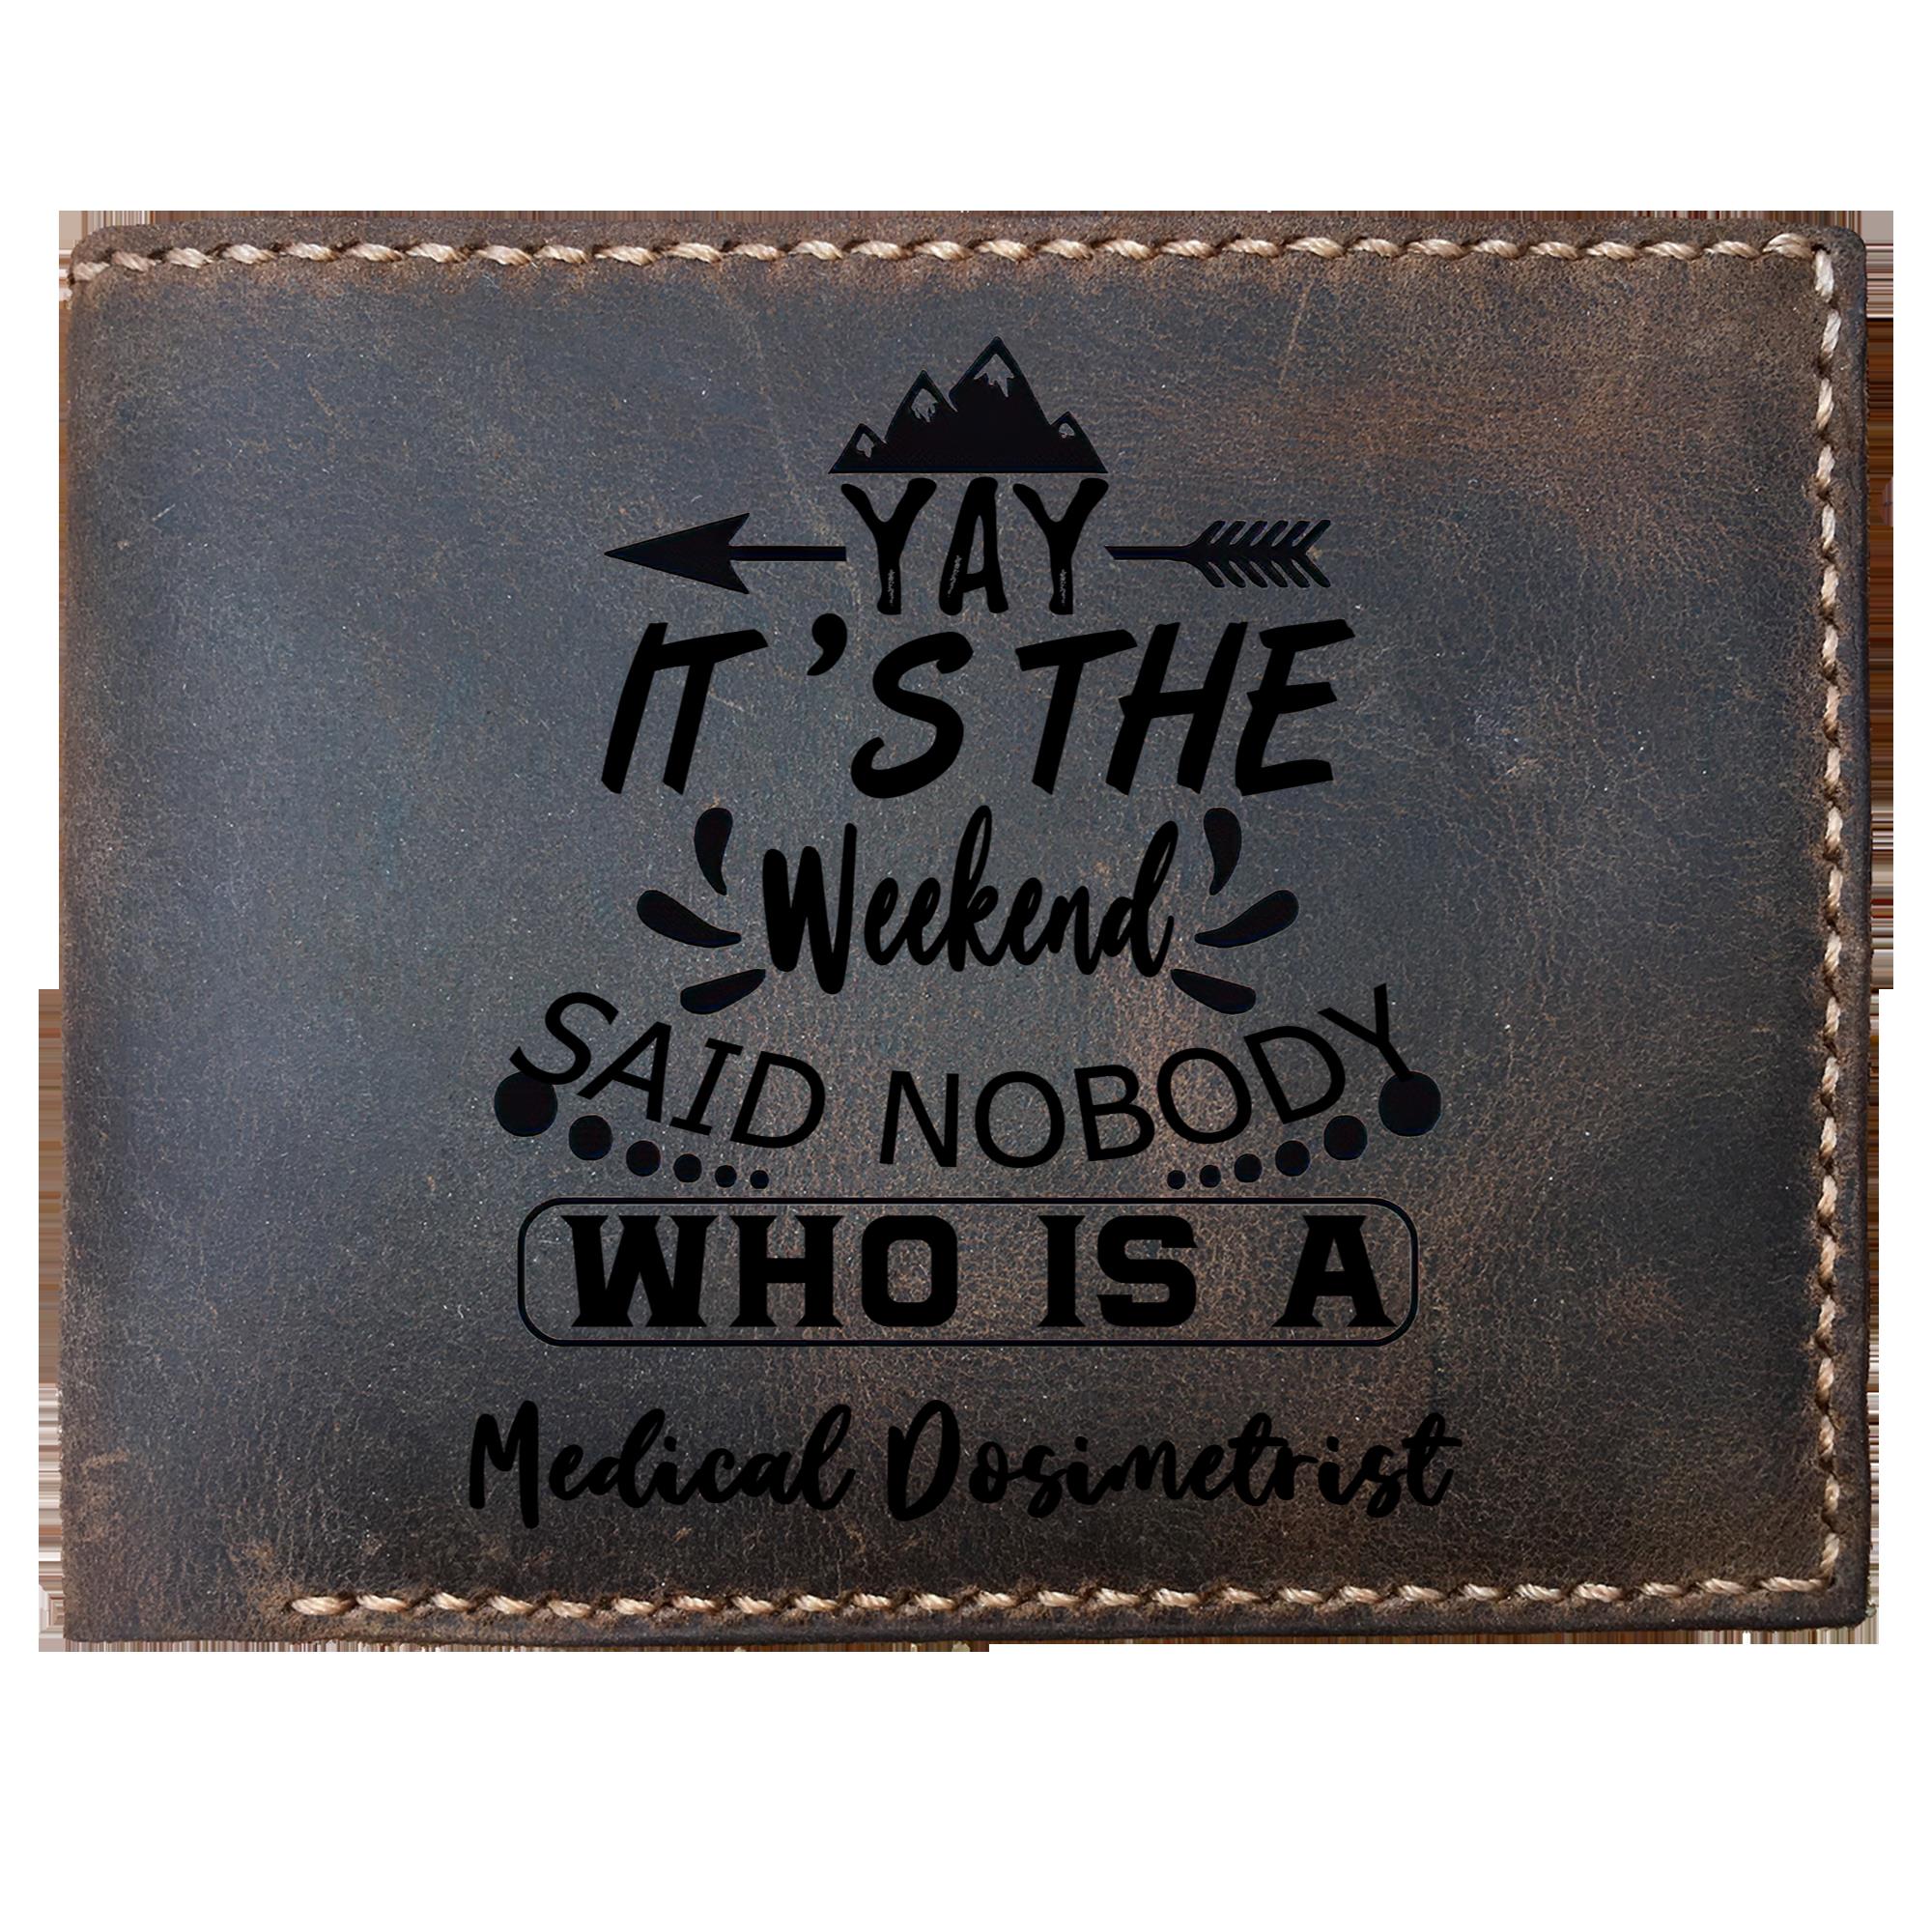 Skitongifts Funny Custom Laser Engraved Bifold Leather Wallet For Men, It's The Weekend Said Nobody Who Is A Medical Dosimetrist, Father's Day Gifts